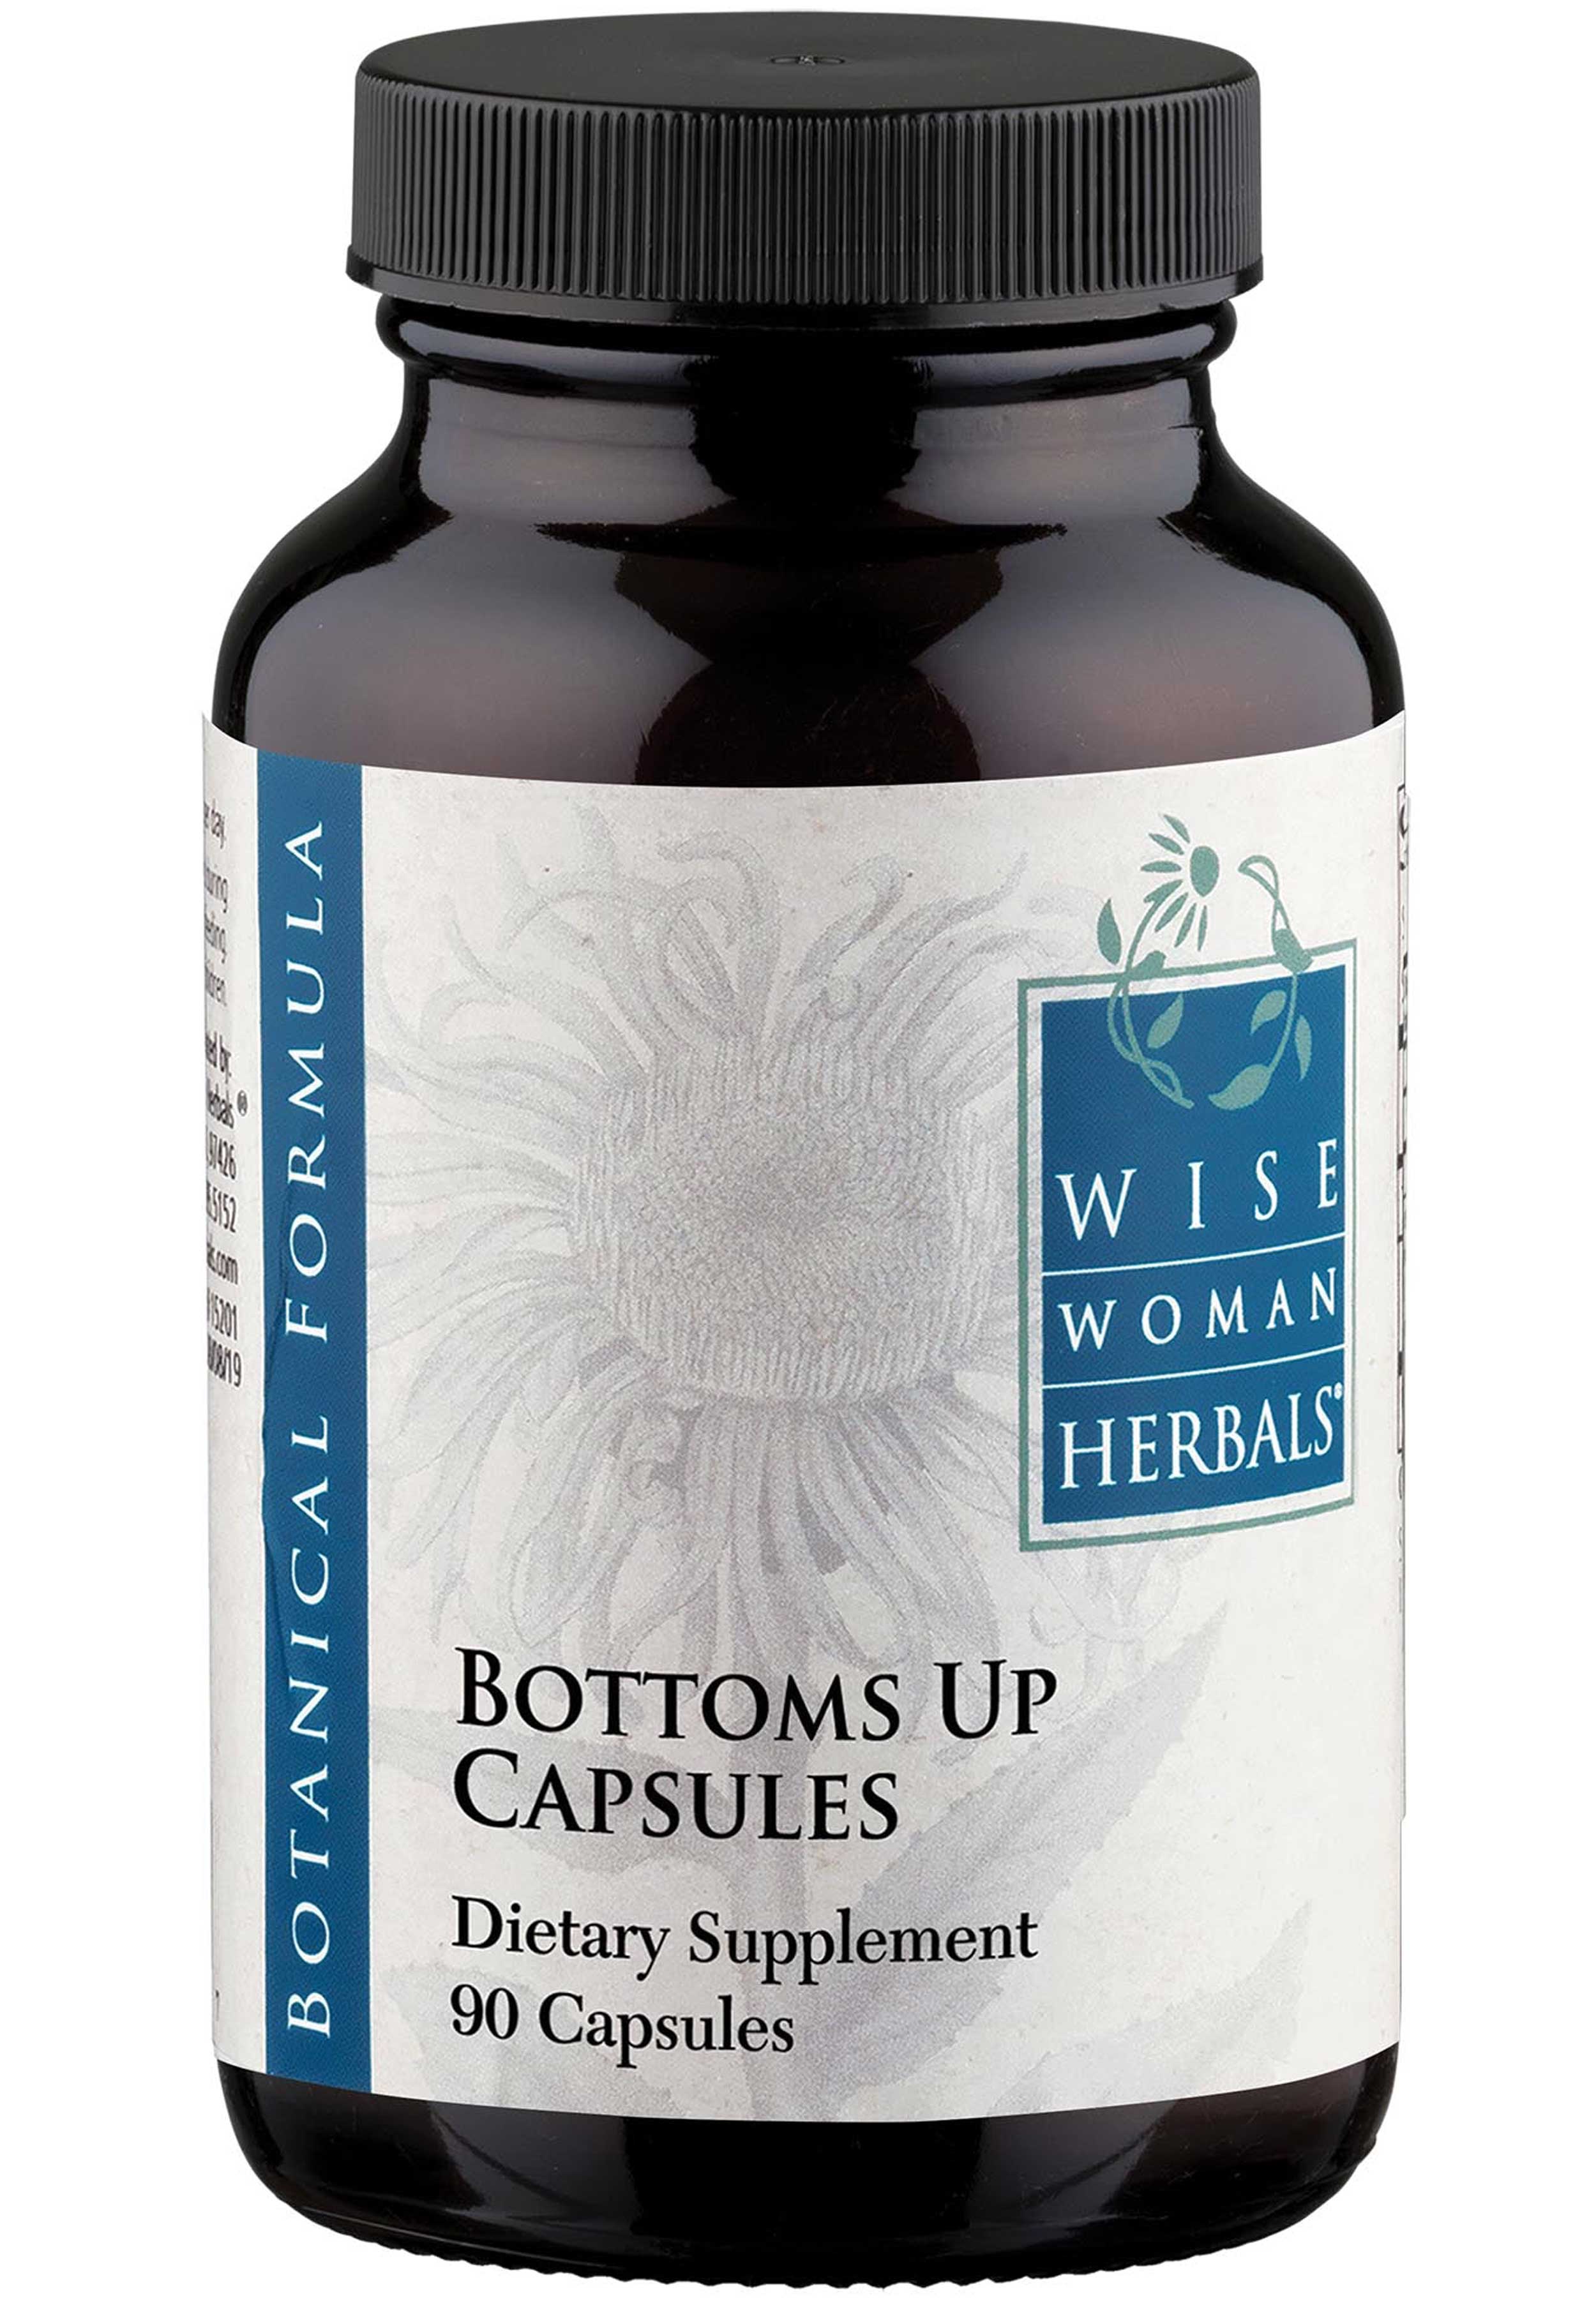 Wise Woman Herbals Bottoms Up Capsules